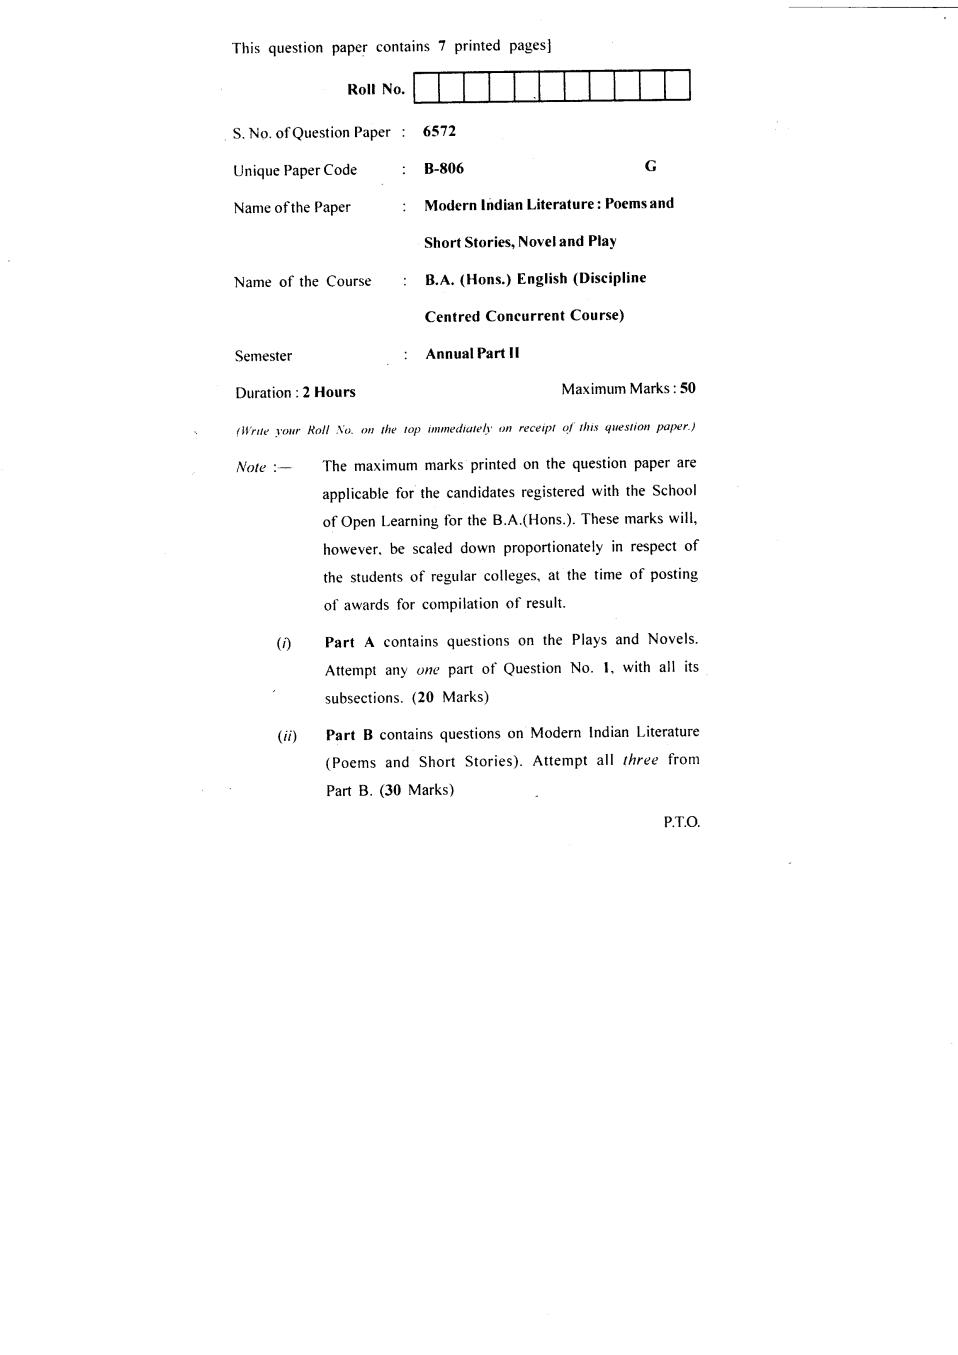 DU SOL Question Paper 2018 BA (Hons.) English - Modern Indian Literature - Page 1